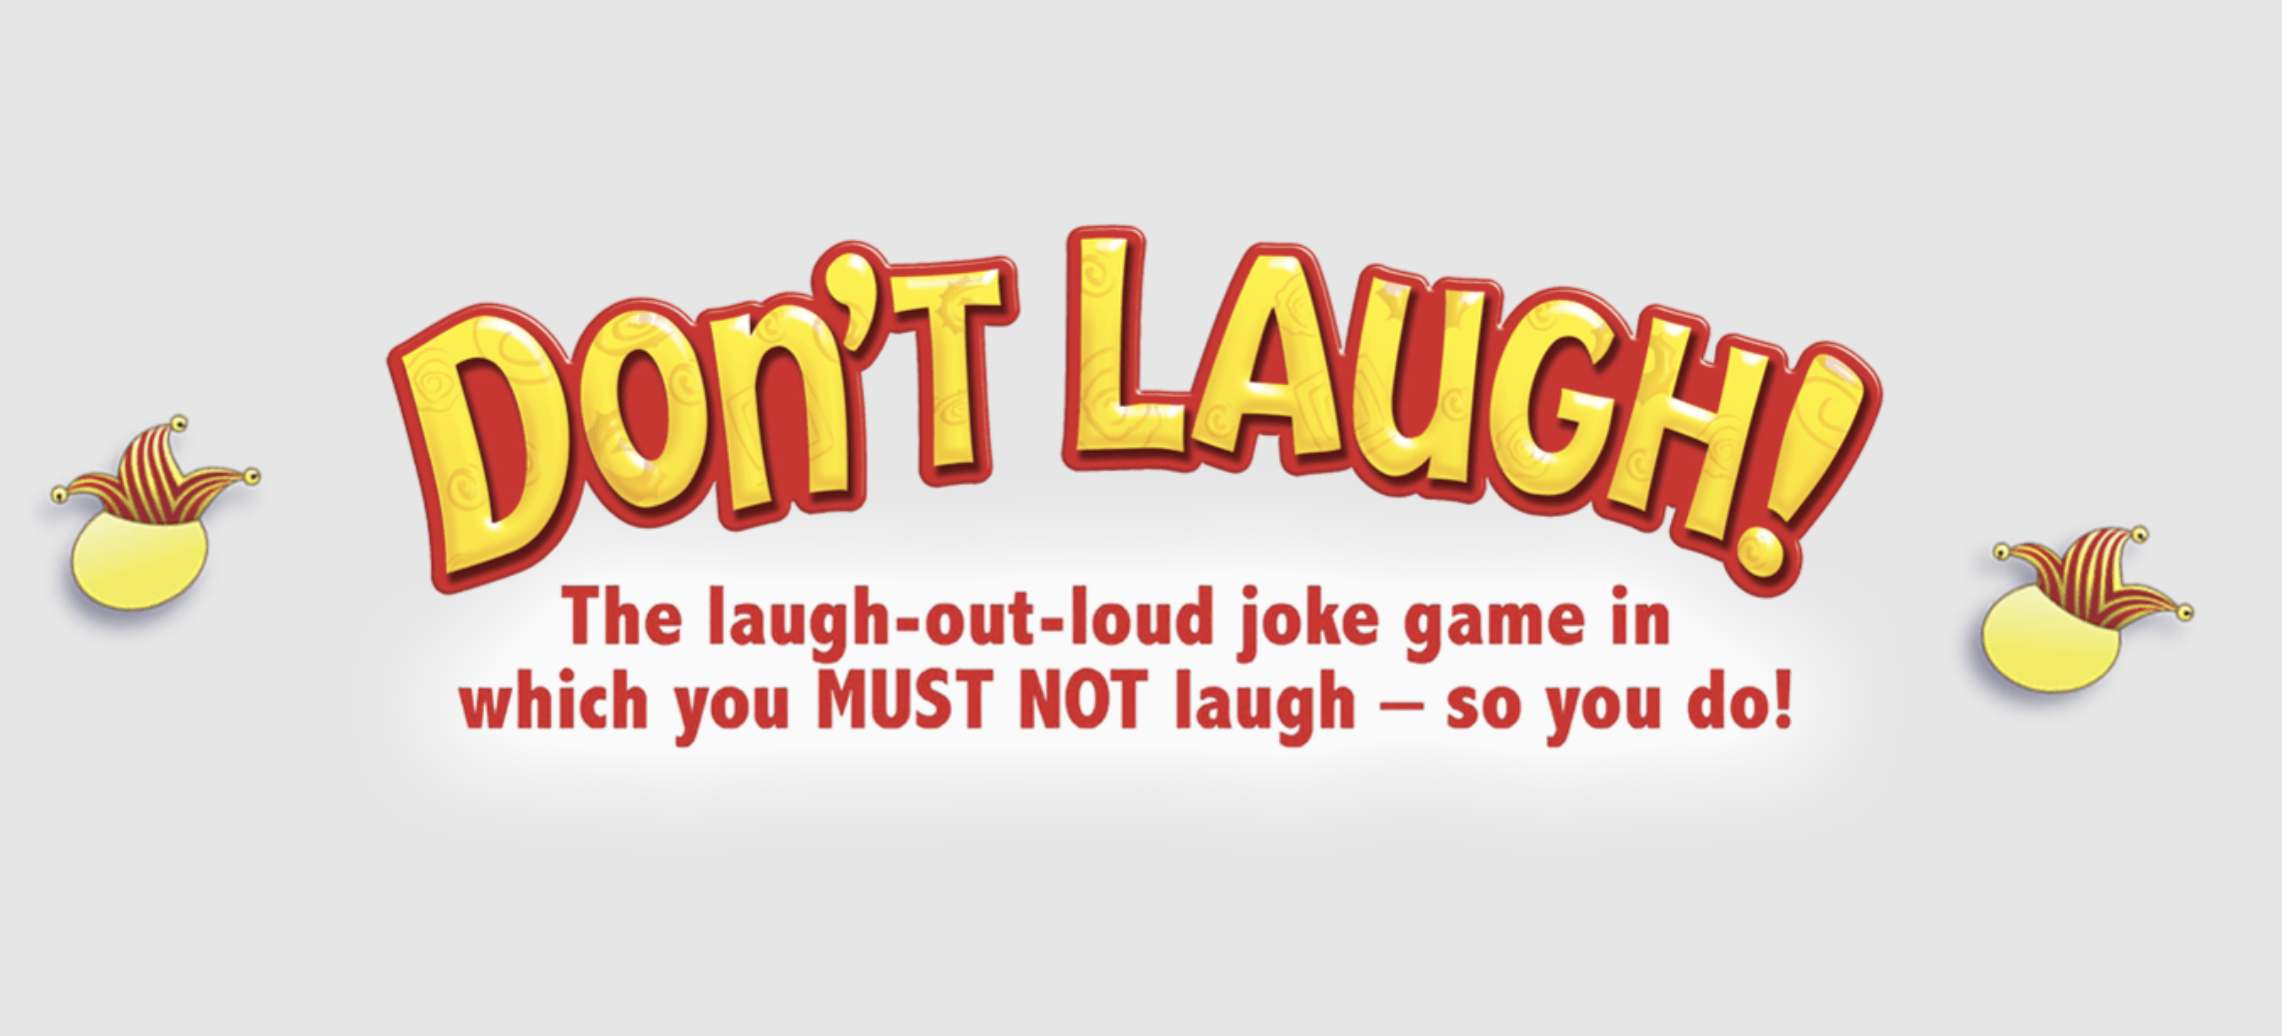 text that reads "Don't Laugh" in a large yellow font. Beneath, it reads in a red font "The laugh-out-loud joke game in which you MUST NOT laugh -- so you do!"